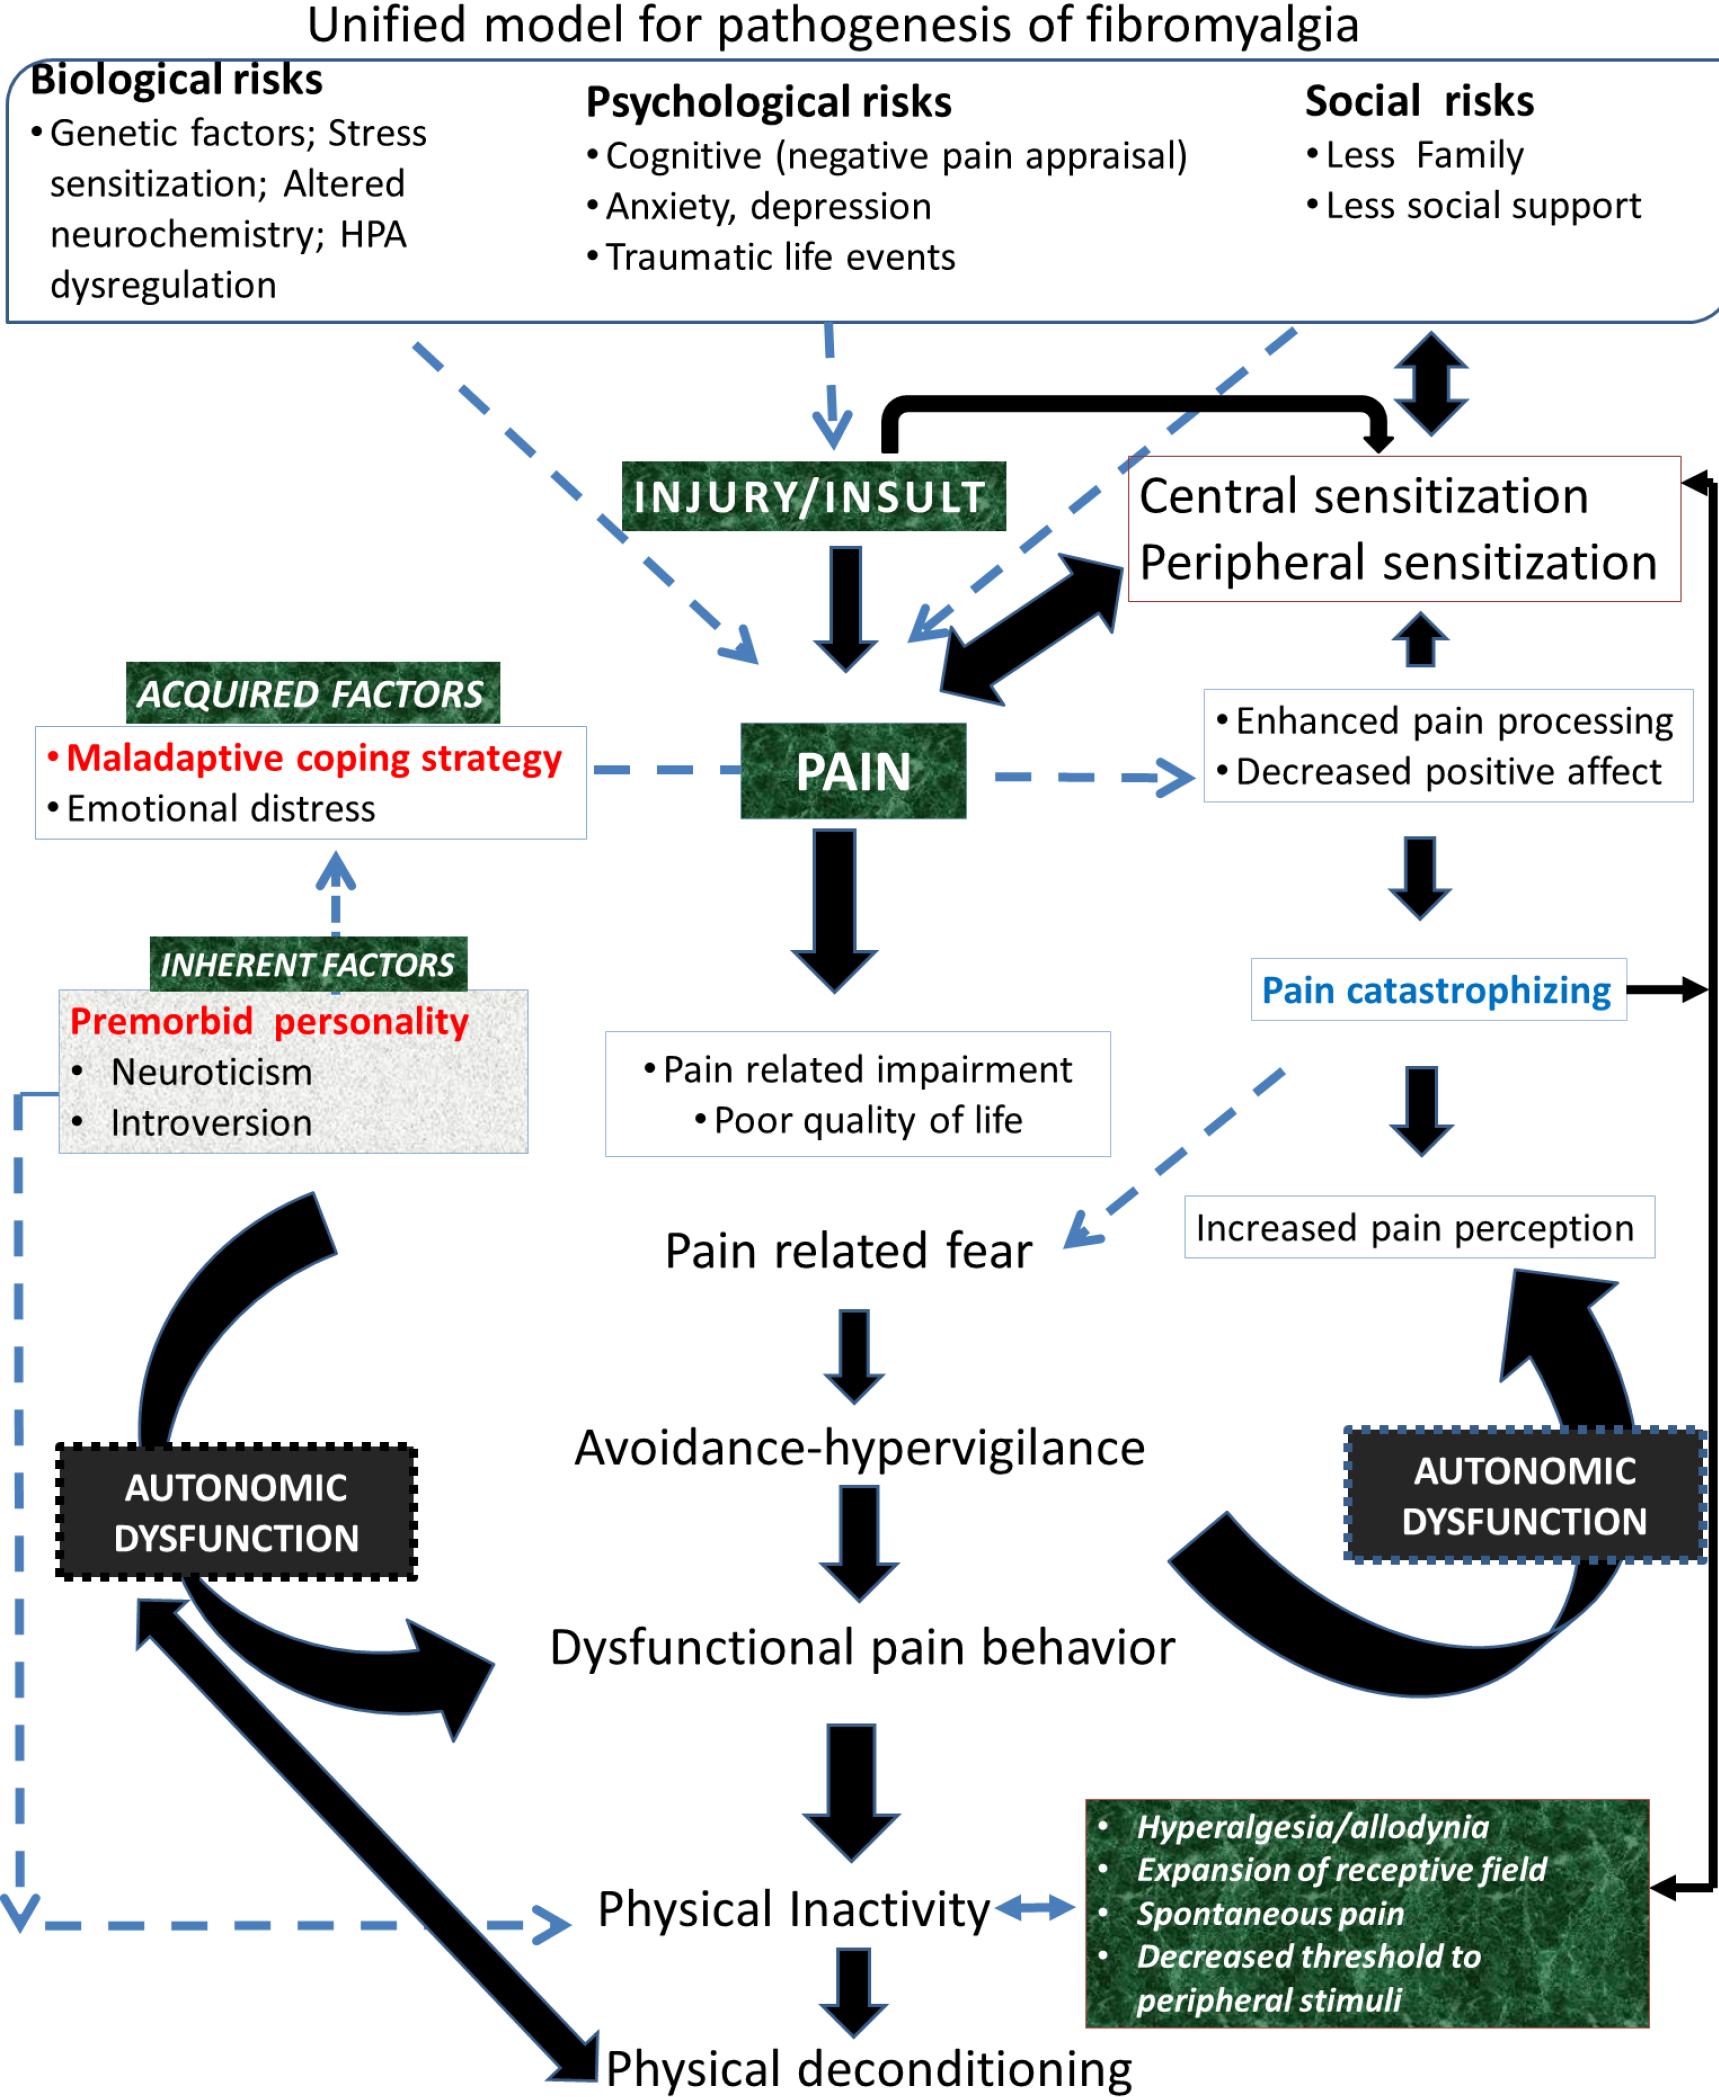 A hierarchical model inclusive of personality and associated psychophysiological correlates that may affect the etiopathogenesis of fibromyalgia has been proposed on the framework of the top-down biopsychosocial model. This model also encompasses the physiological mechanism of widespread pain caused due to both central and peripheral sensitization. Autonomic dysfunction is proposed to be the key element connecting characteristic personality traits and behavior adaptations bringing out widespread pain in fibromyalgia.